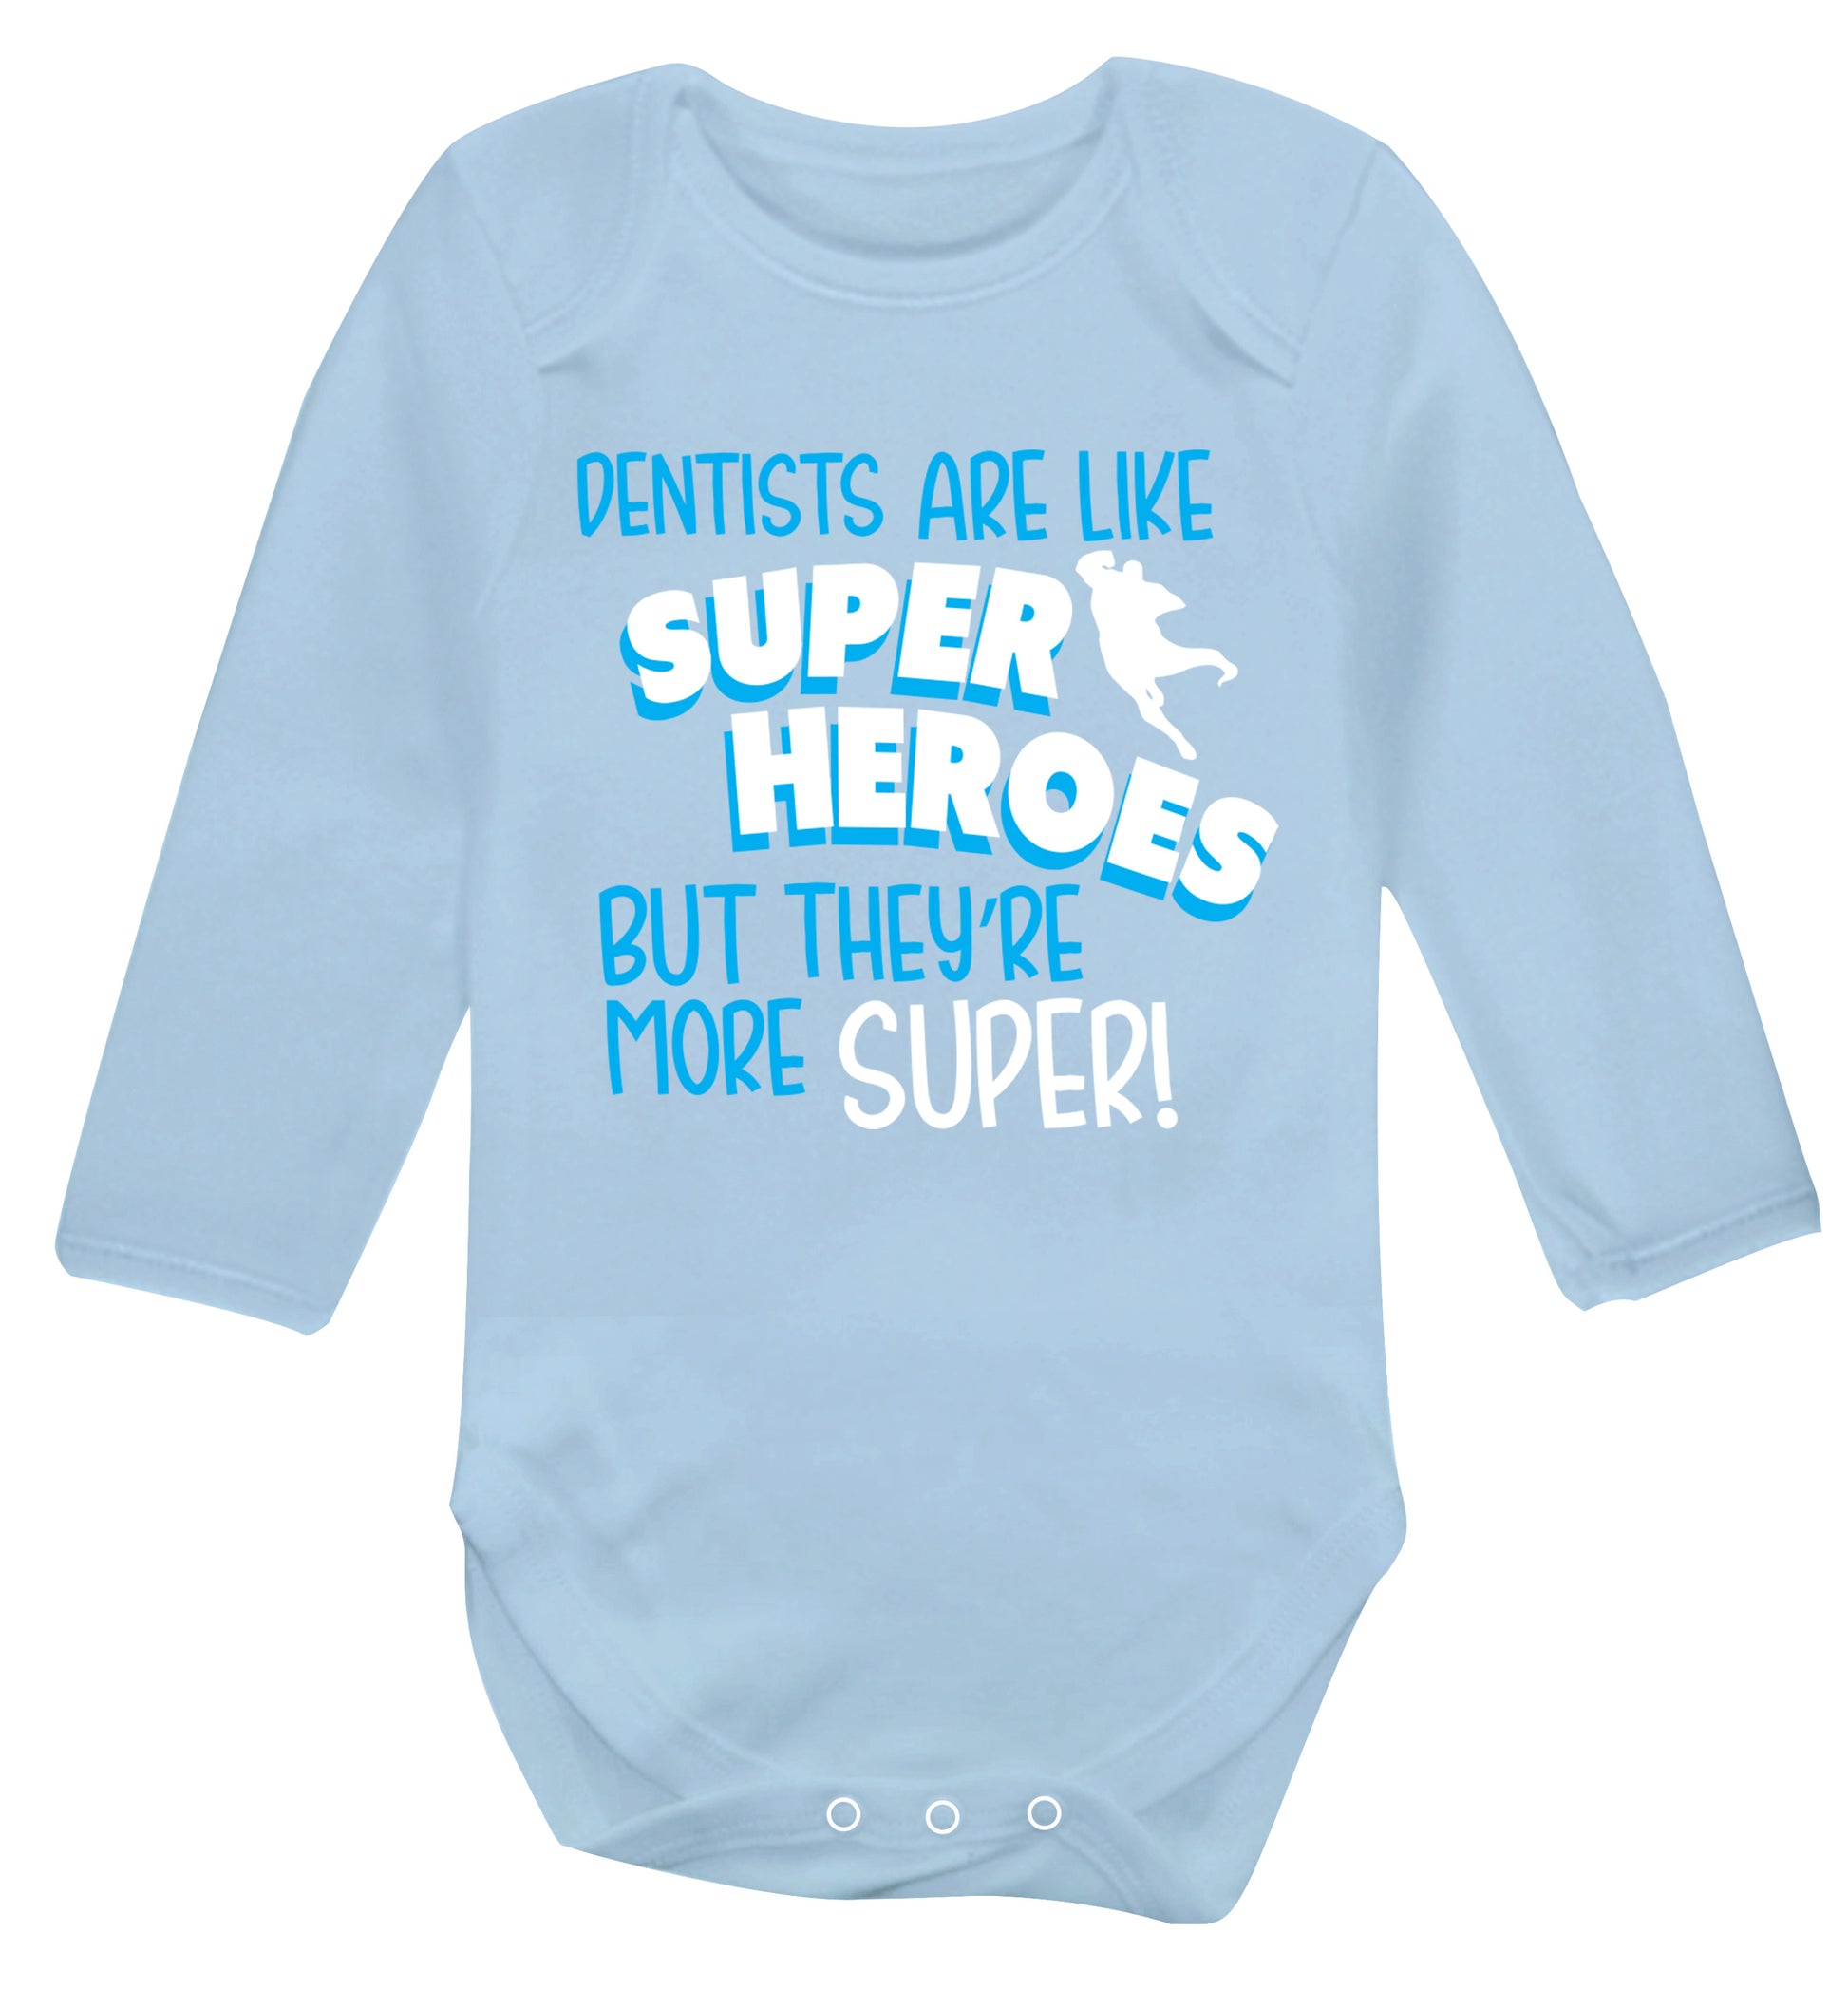 Dentists are like superheros but they're more super Baby Vest long sleeved pale blue 6-12 months